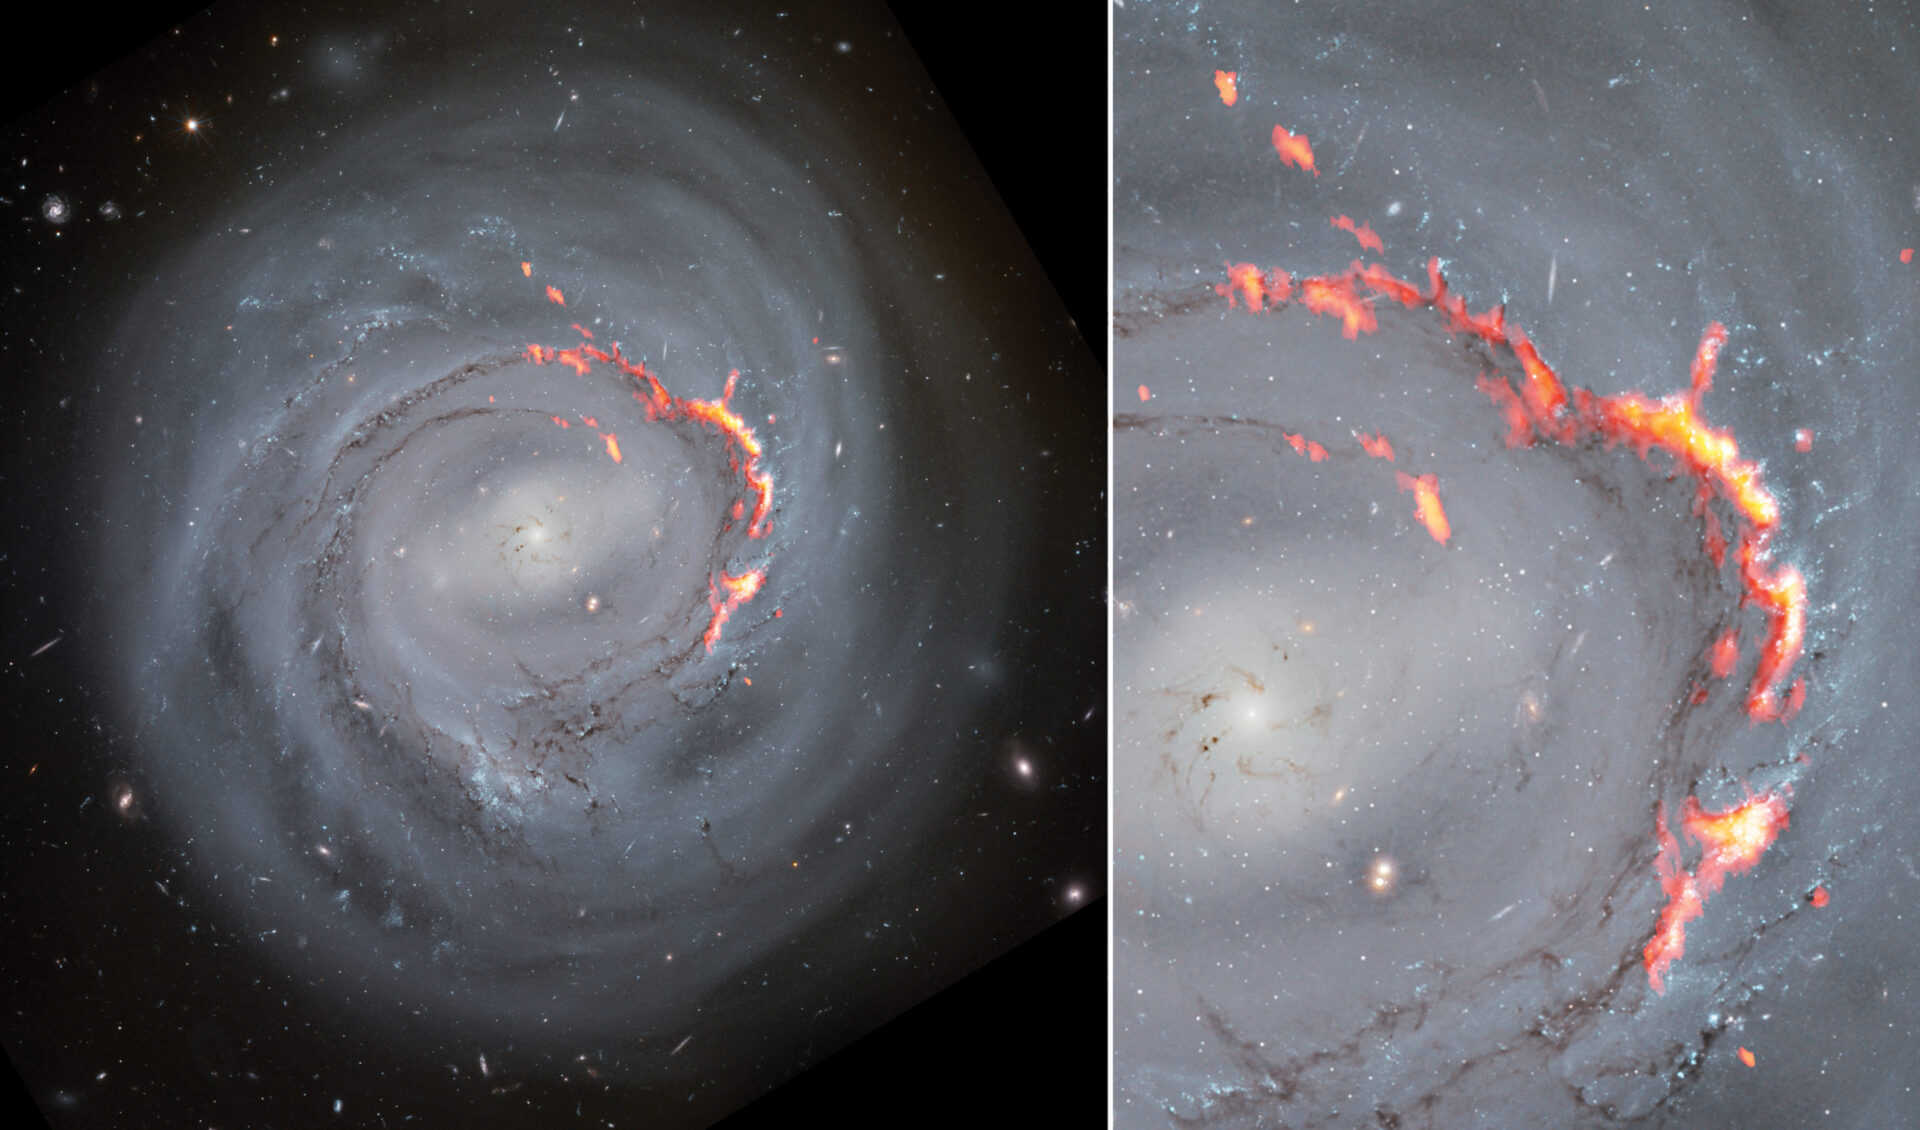 <p>This side-by-side composite shows ALMA (red/orange) data laid over Hubble Space Telescope (optical) images of NGC4921. A new study of the spiral bar galaxy revealed filament structures similar to the Pillars of Creation but significantly larger. These structures are caused by a process known as ram pressure stripping, which pushes gas out of galaxies, leaving them without the material needed to form new stars.</p>
<p>Credit:  ALMA (ESO/NAOJ/NRAO)/S. Dagnello (NRAO), NASA/ESA/Hubble/K. Cook (LLNL), L. Shatz</p>
